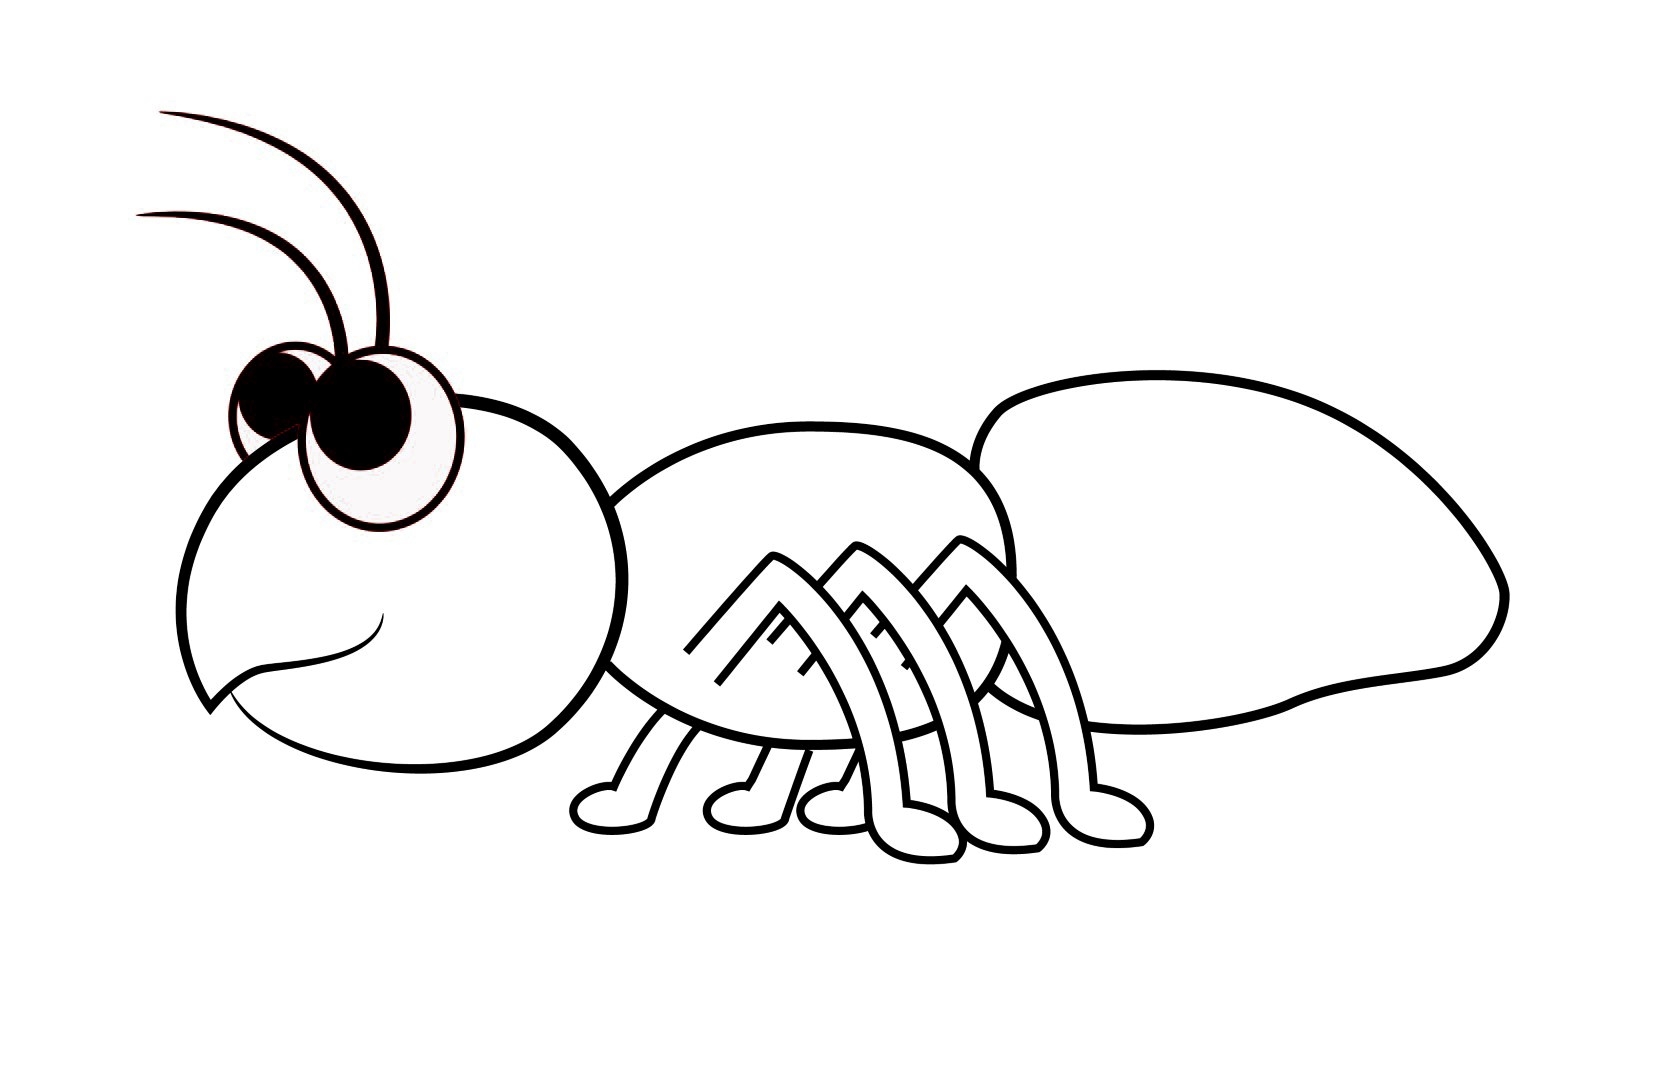 Ant coloring pages for. Ants clipart colouring page